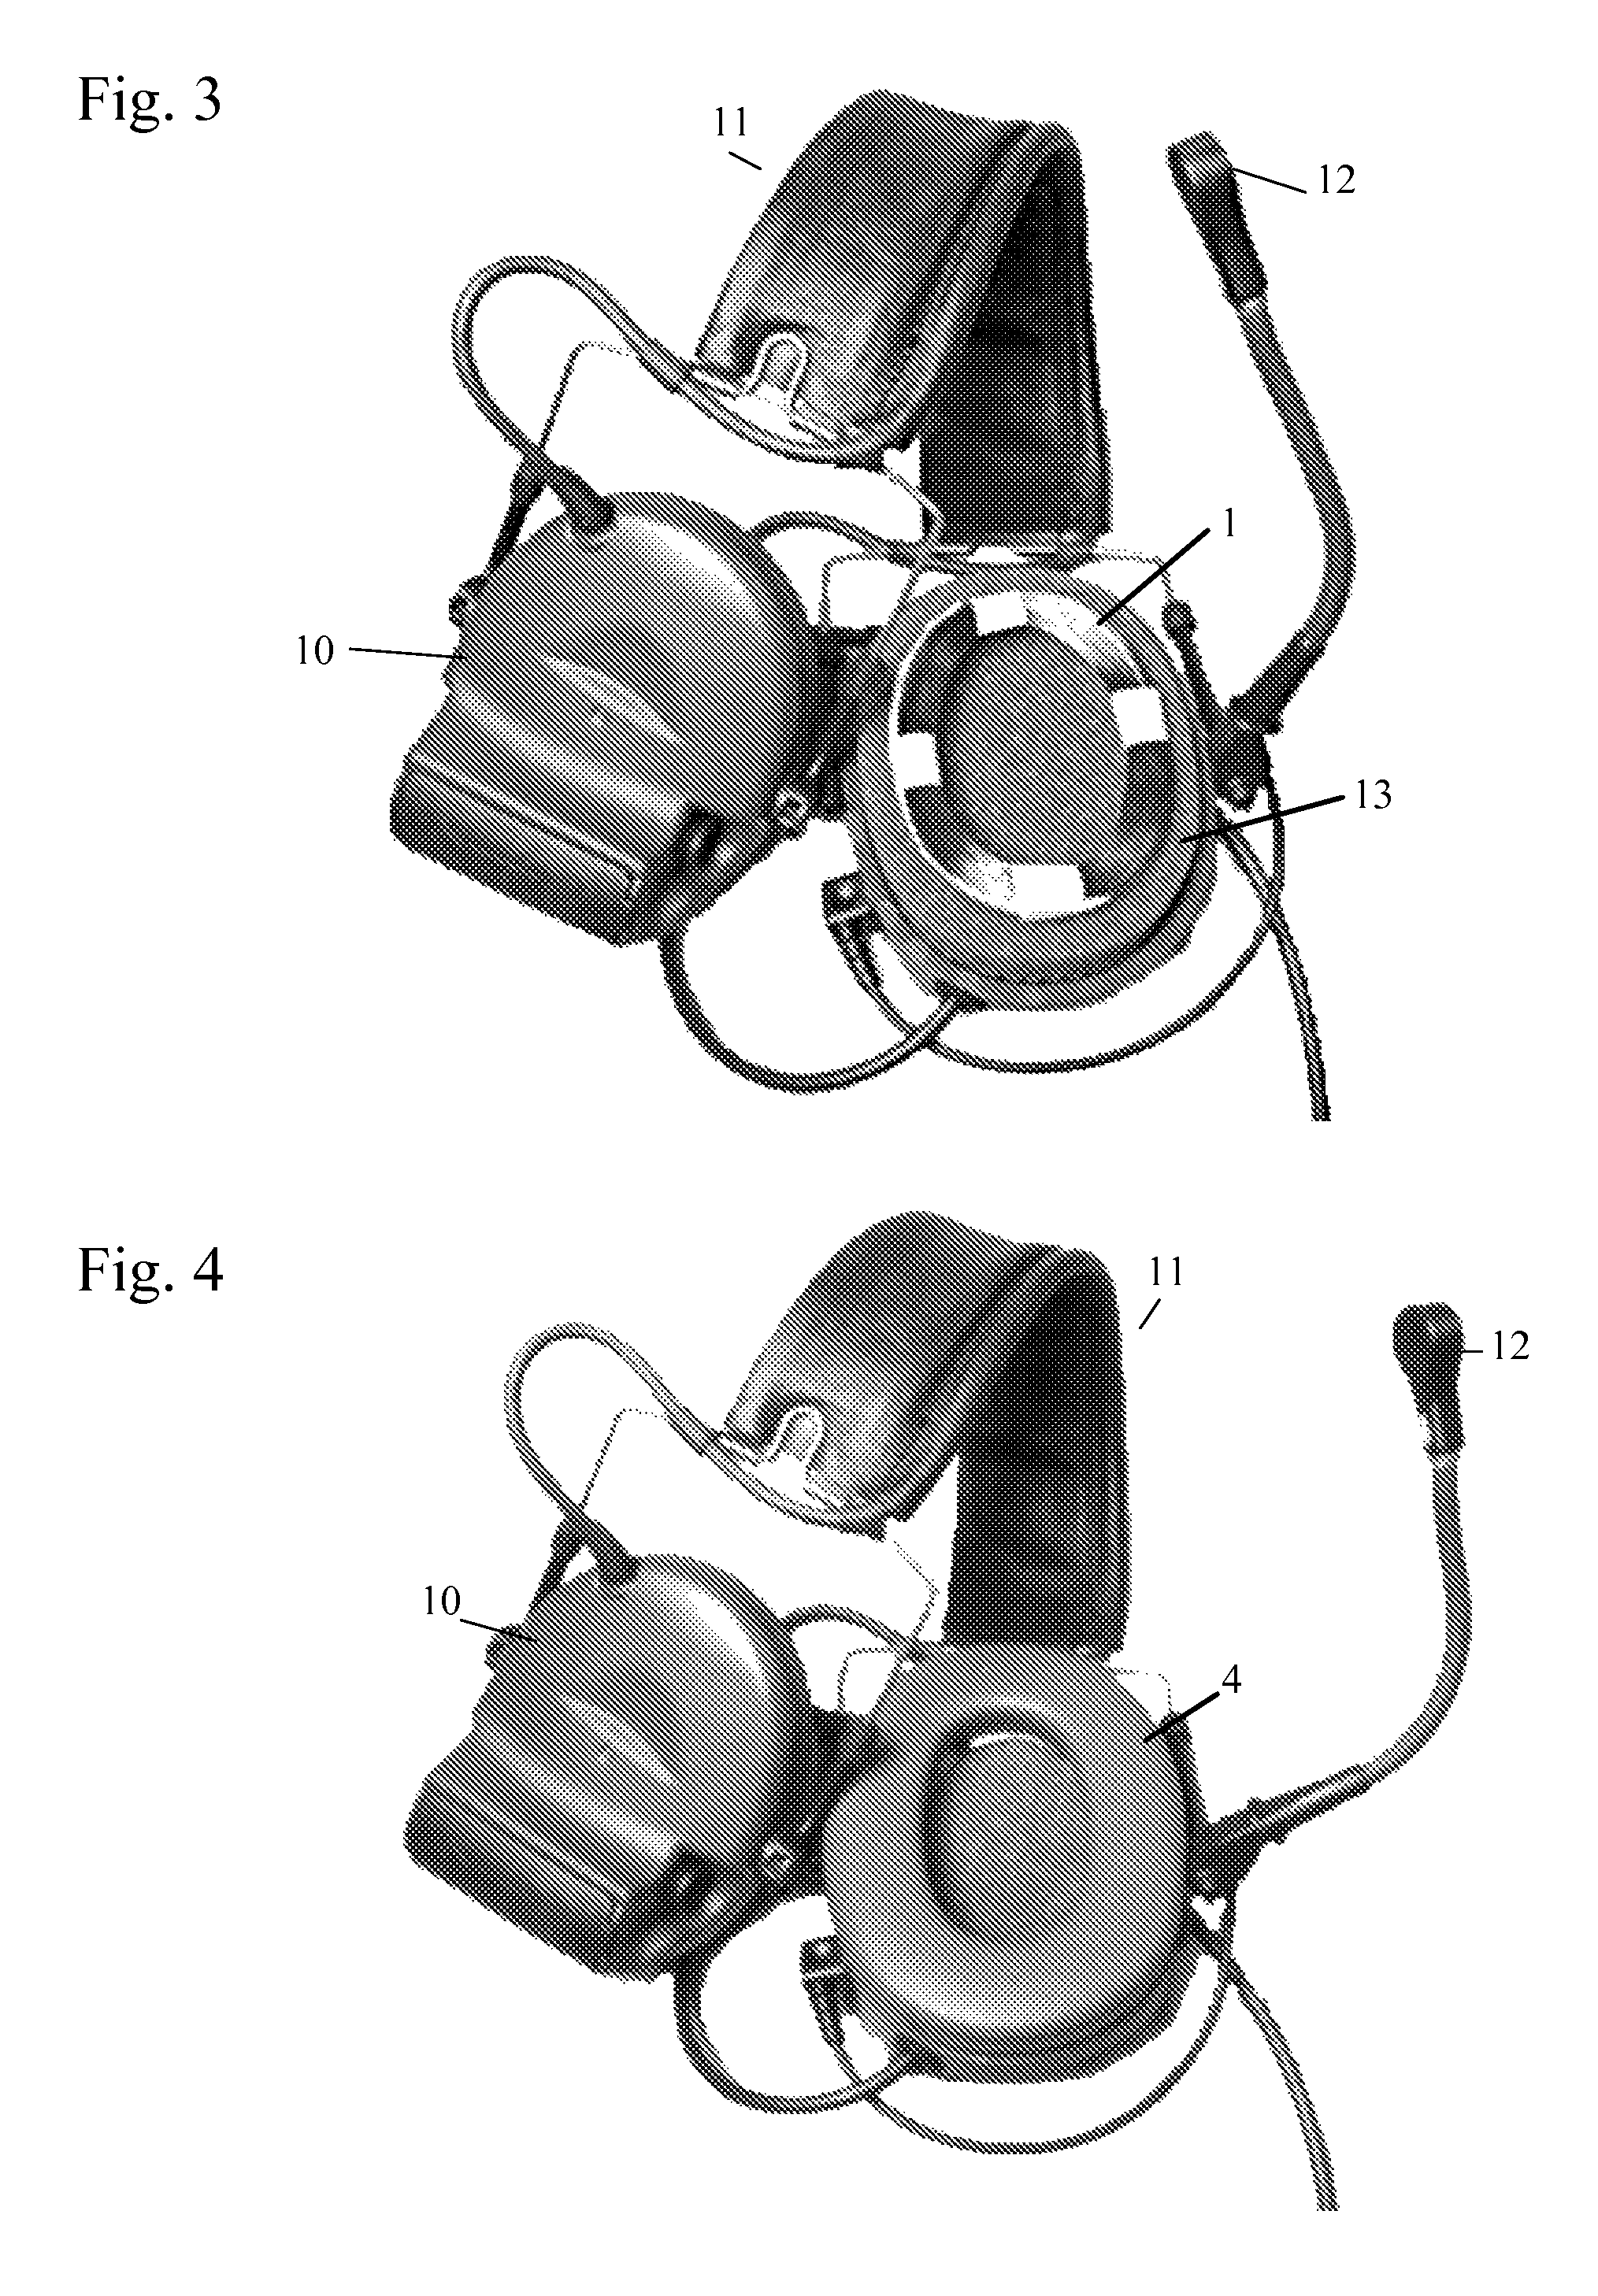 Wireless communications headset system employing a loop transmitter that fits around the pinna